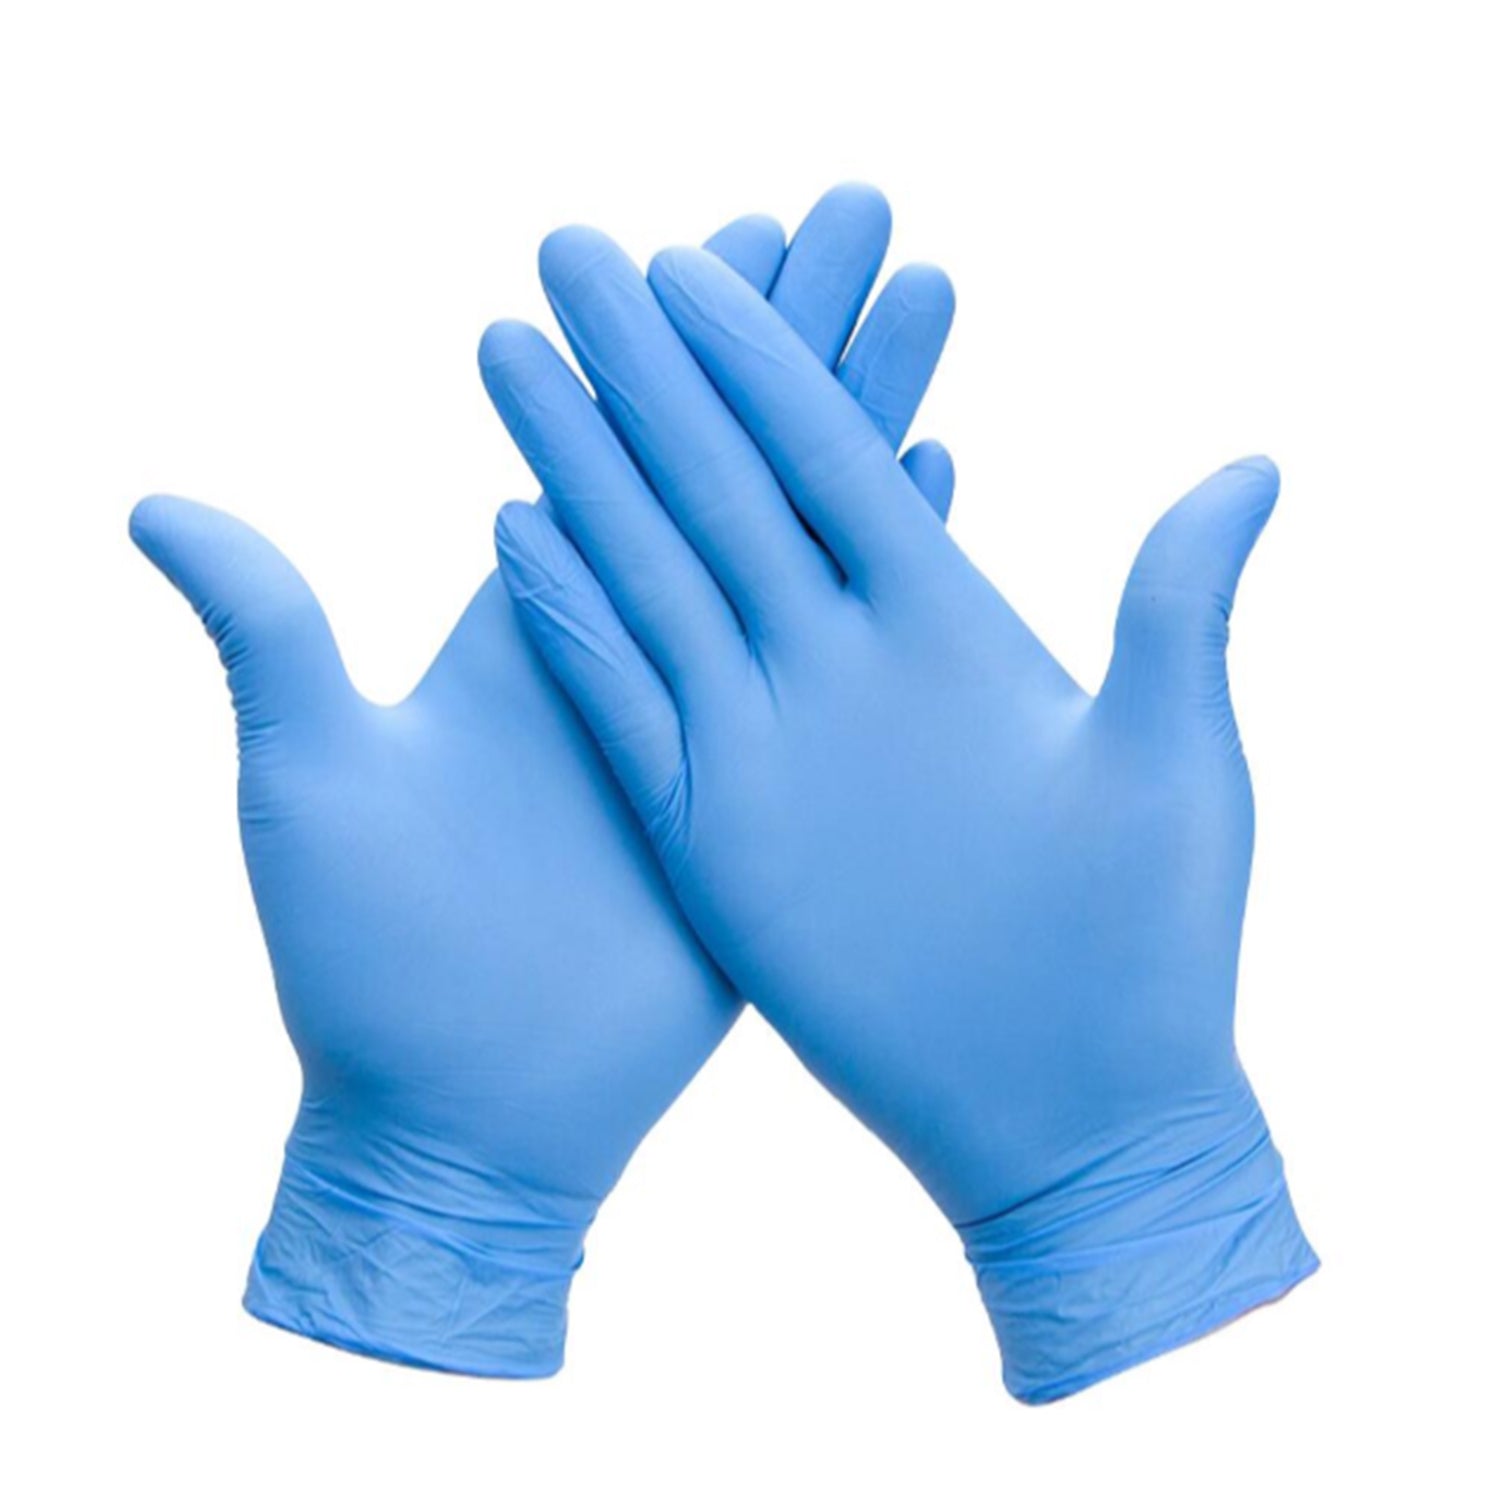 Premier AF Nitrile Examination Gloves | Sterile | Latex Free | Small | Pack of 50 Pairs (4)